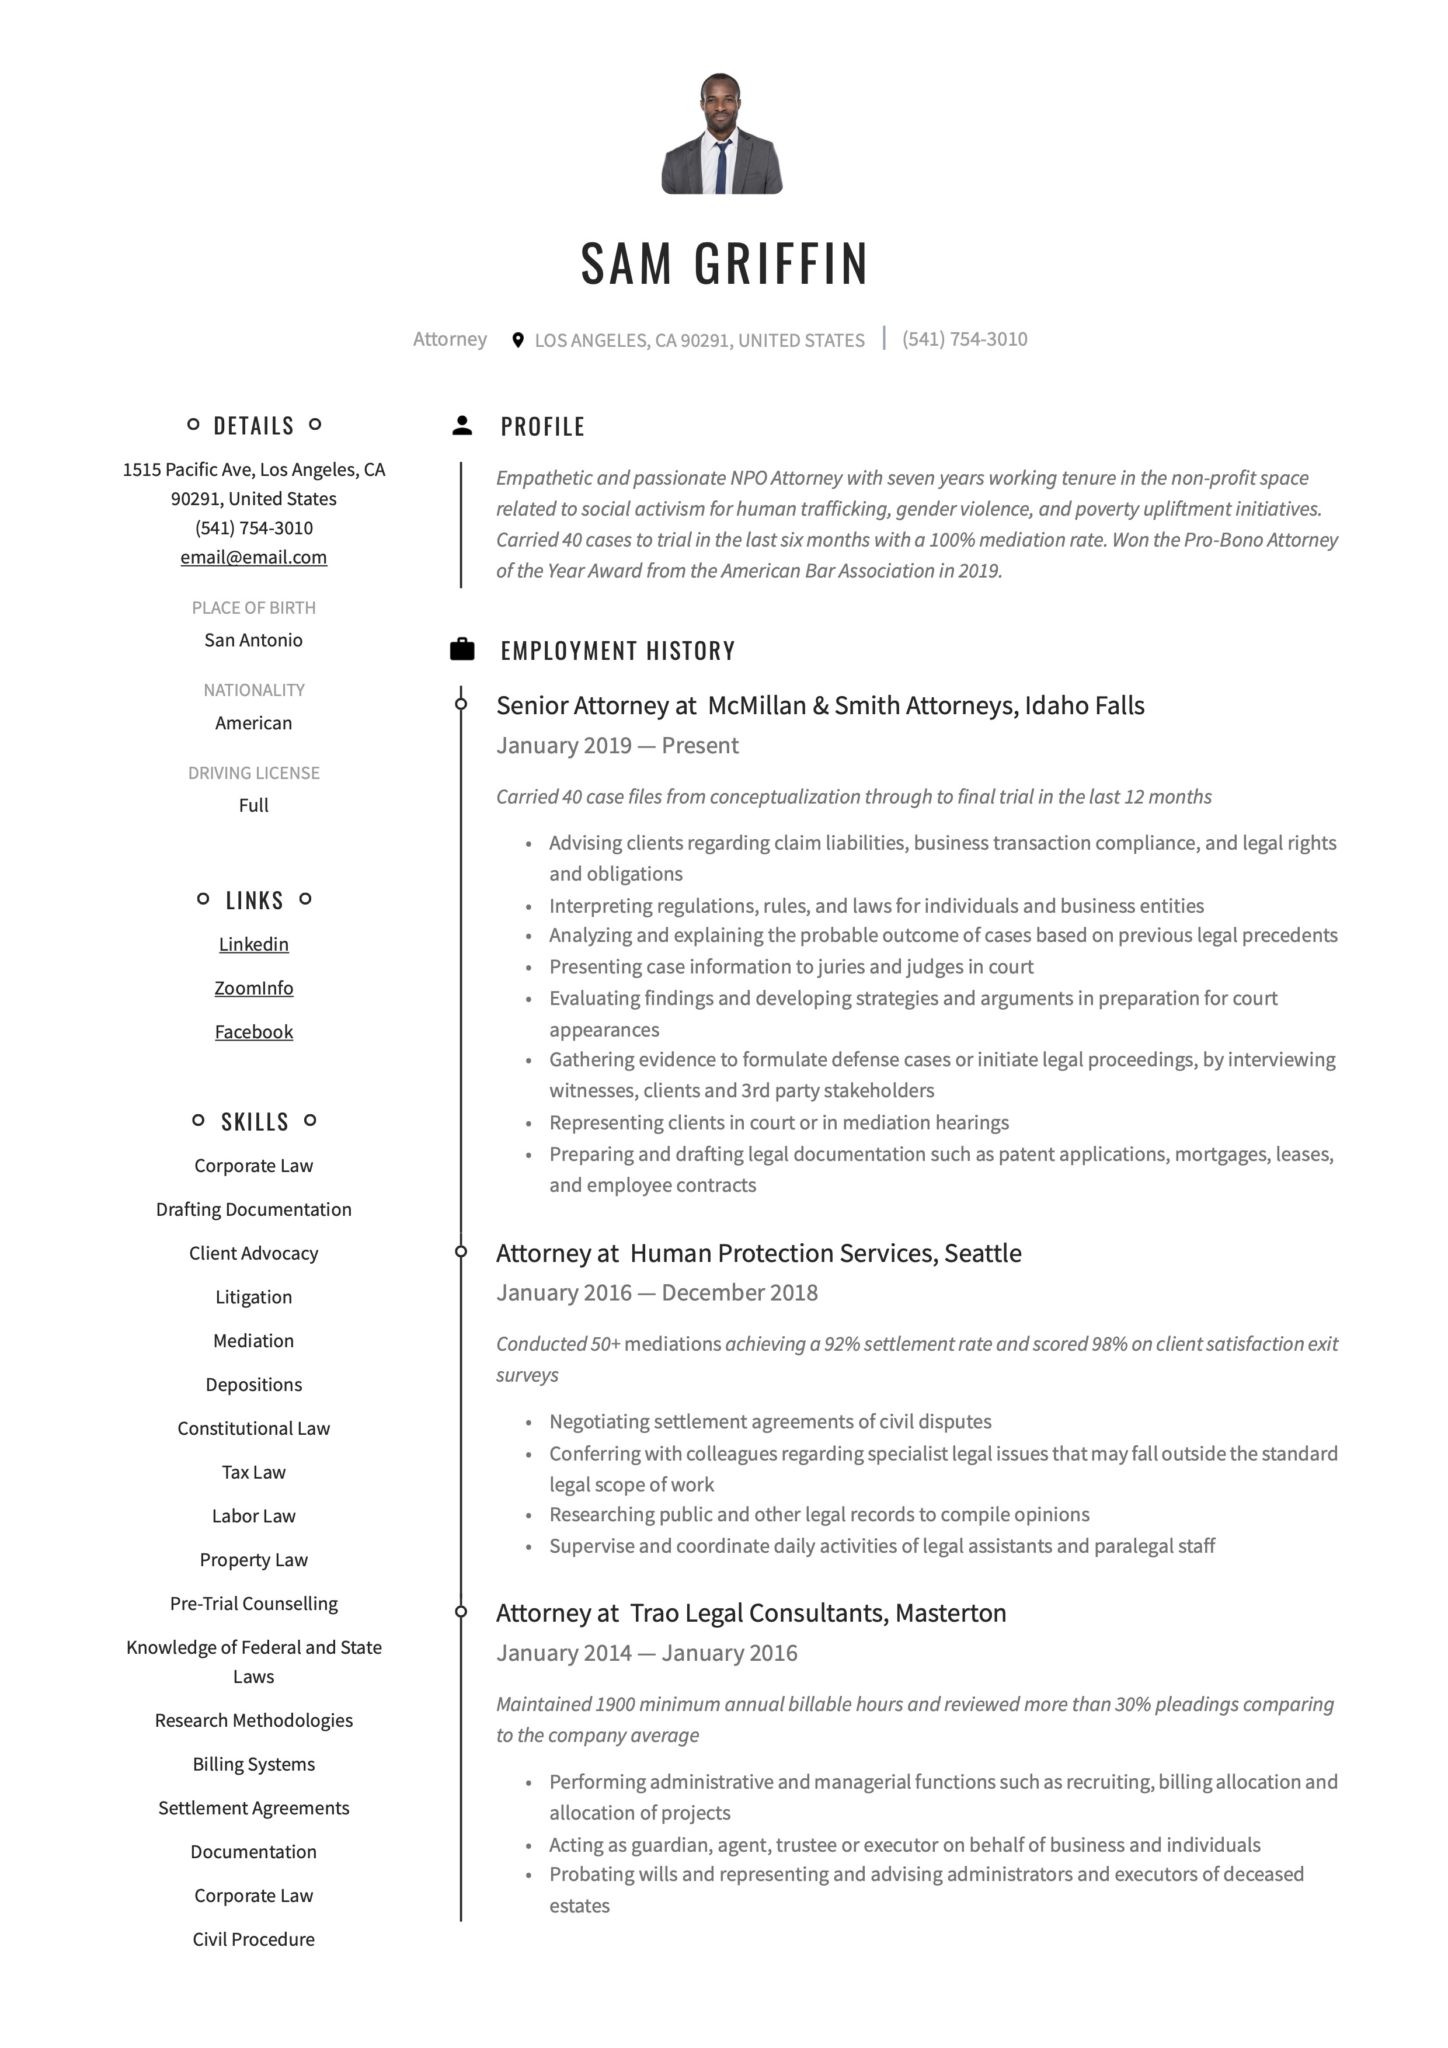 Sample Respresentative Matters for Lawyer Resume 18 attorney Resume Examples & Writing Guide Templates 2022